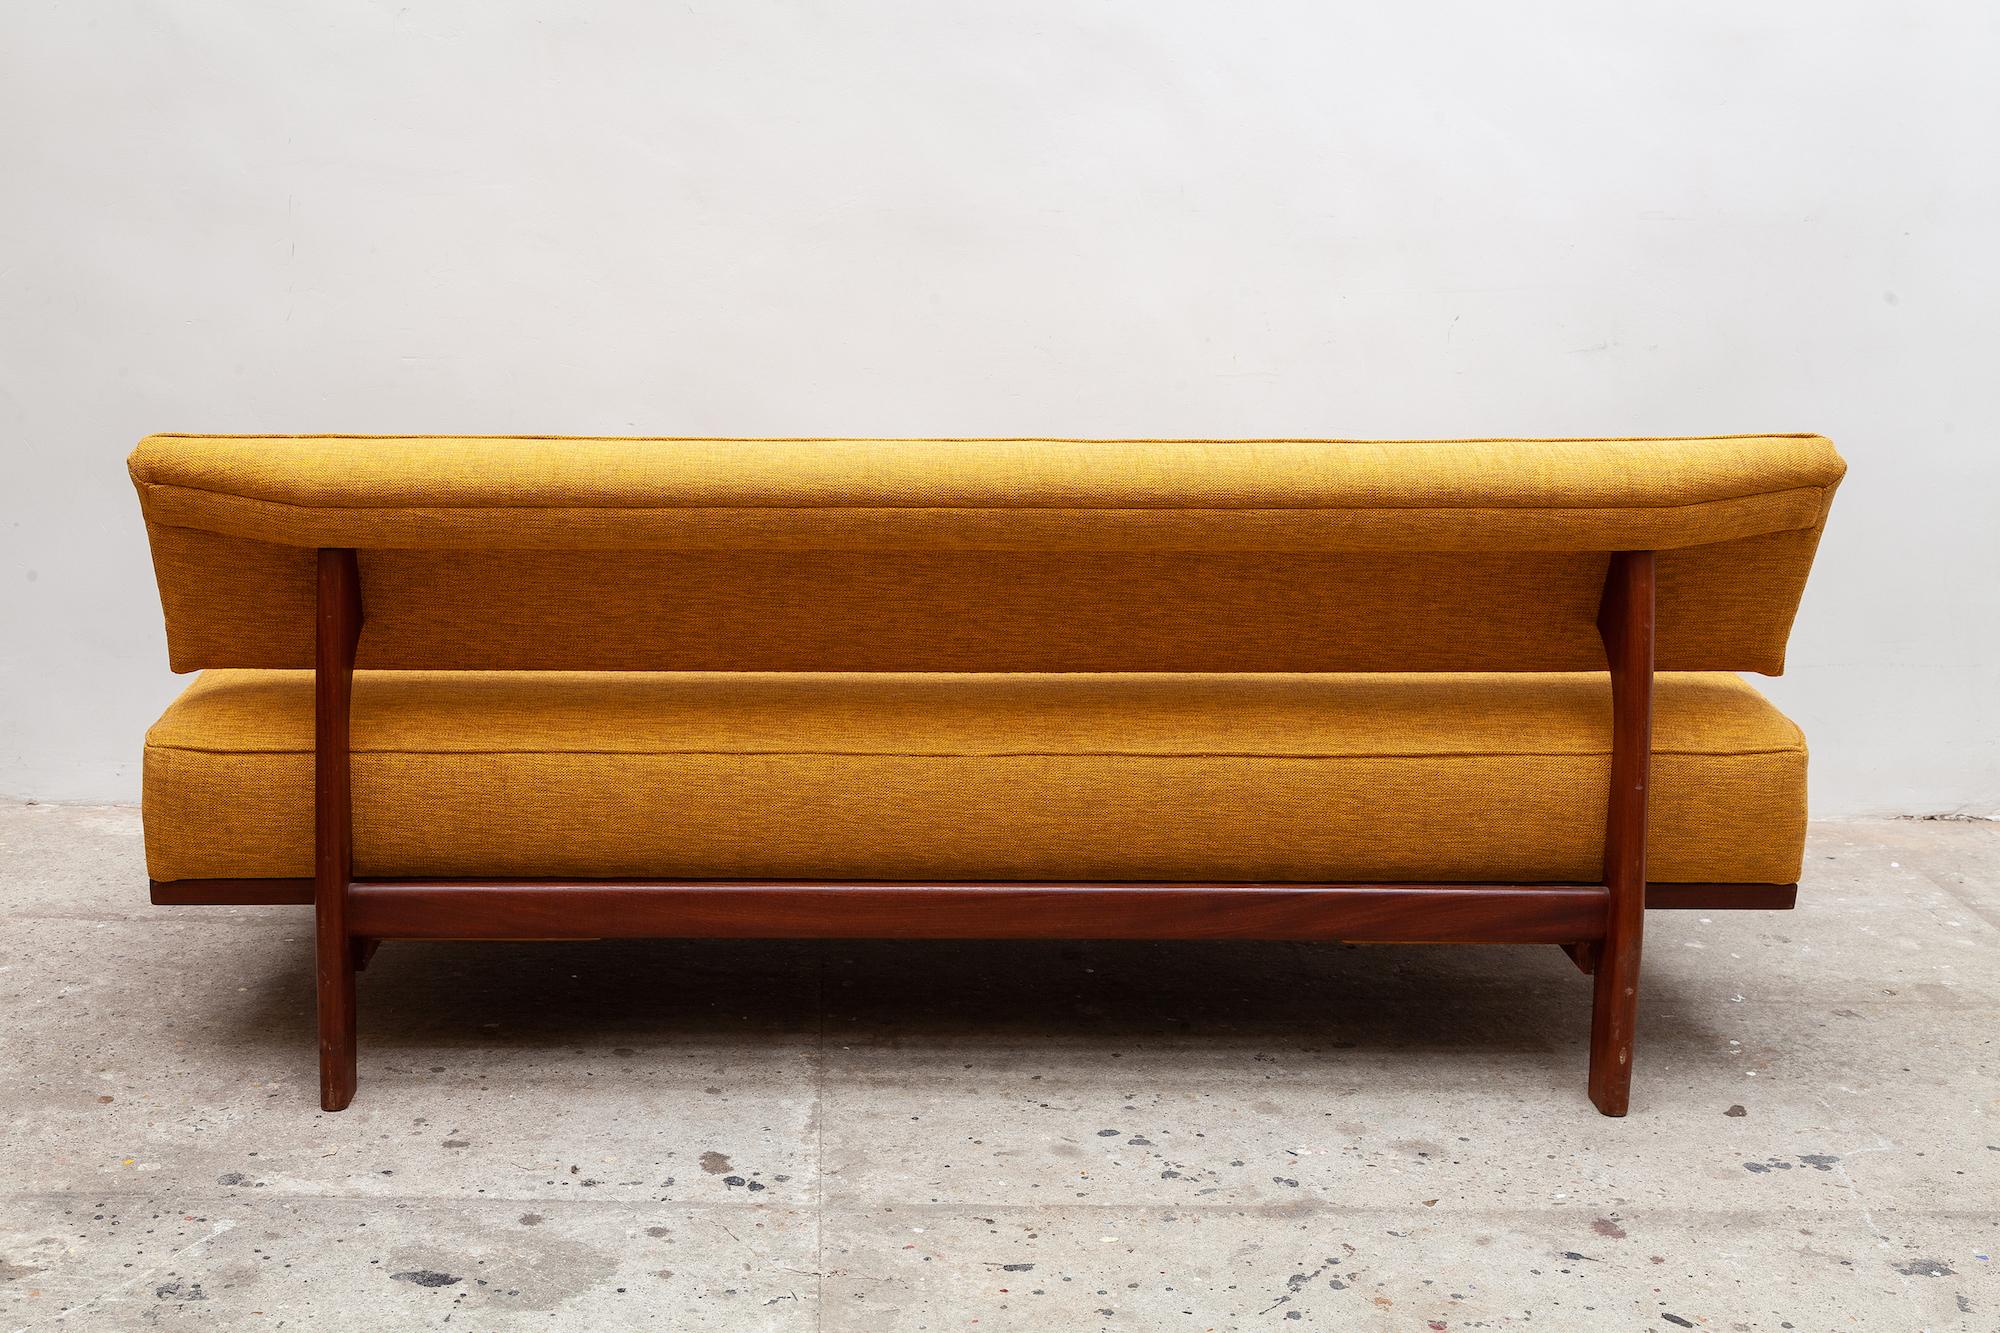 Hand-Crafted Rare Modern Daybed, Sofa by Karl-Erik Ekselius, Sweden, 1960s